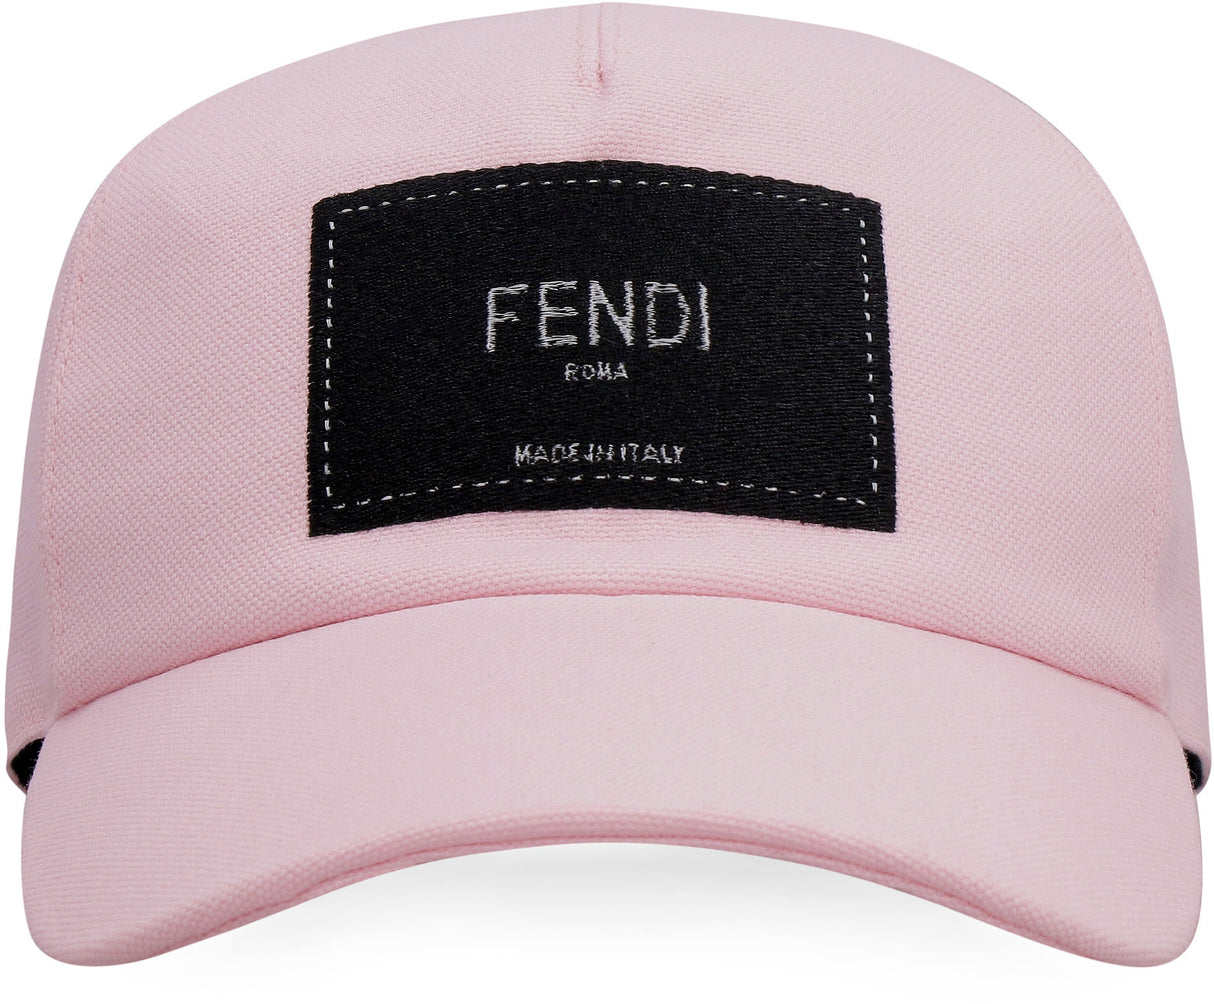 Cotton Baseball Cap in ROSA for Men - SS22 Collection